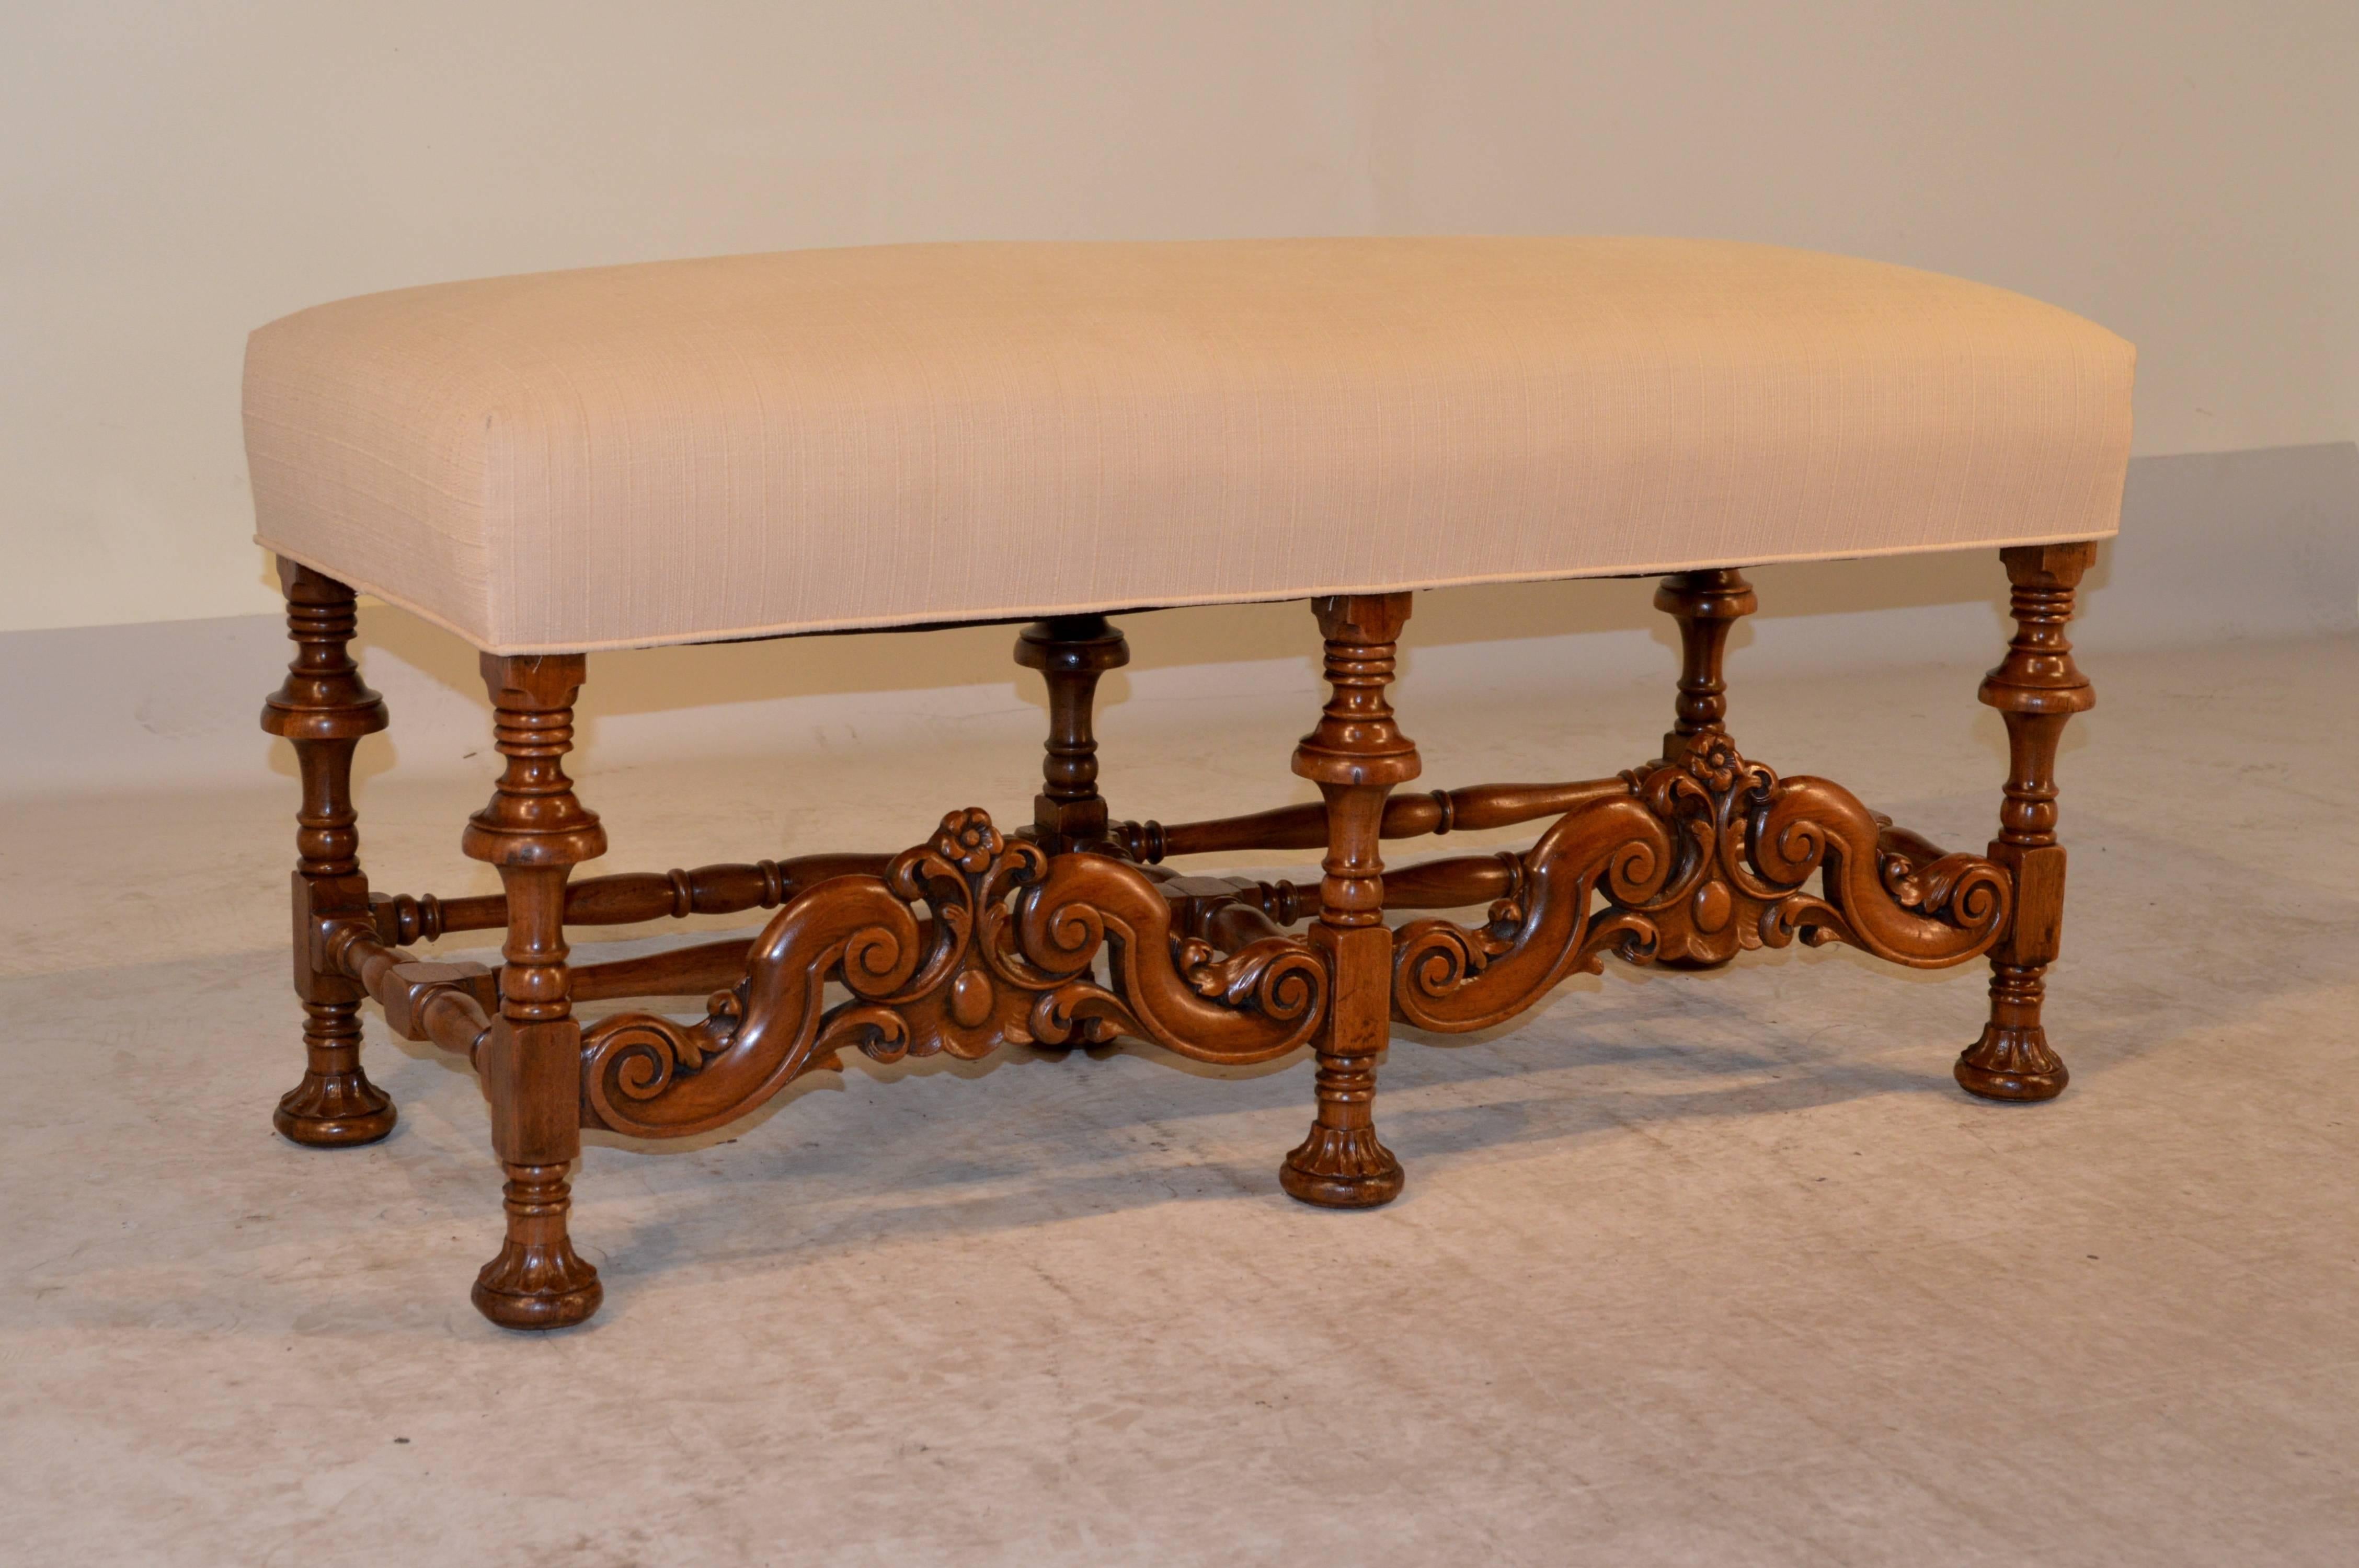 19th Century English carved bench made from walnut with a newly upholstered linen top.  The legs are wonderfully detailed hand turned and end in hand carved decorated bun feet, joined by hand turned stretchers on the back and sides, and the front